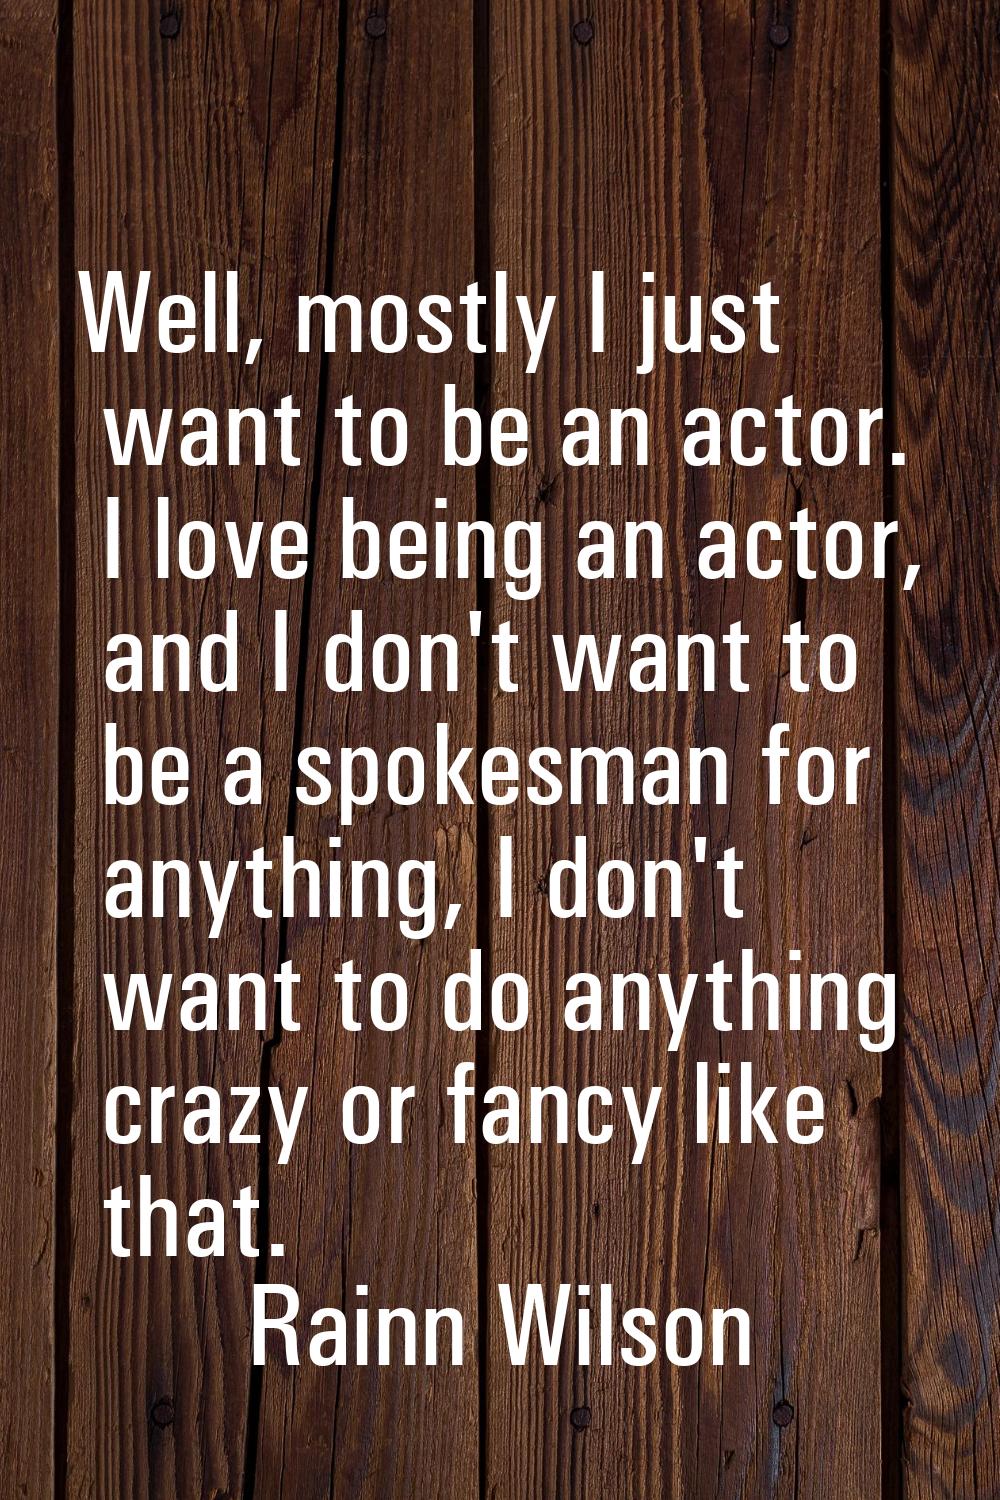 Well, mostly I just want to be an actor. I love being an actor, and I don't want to be a spokesman 